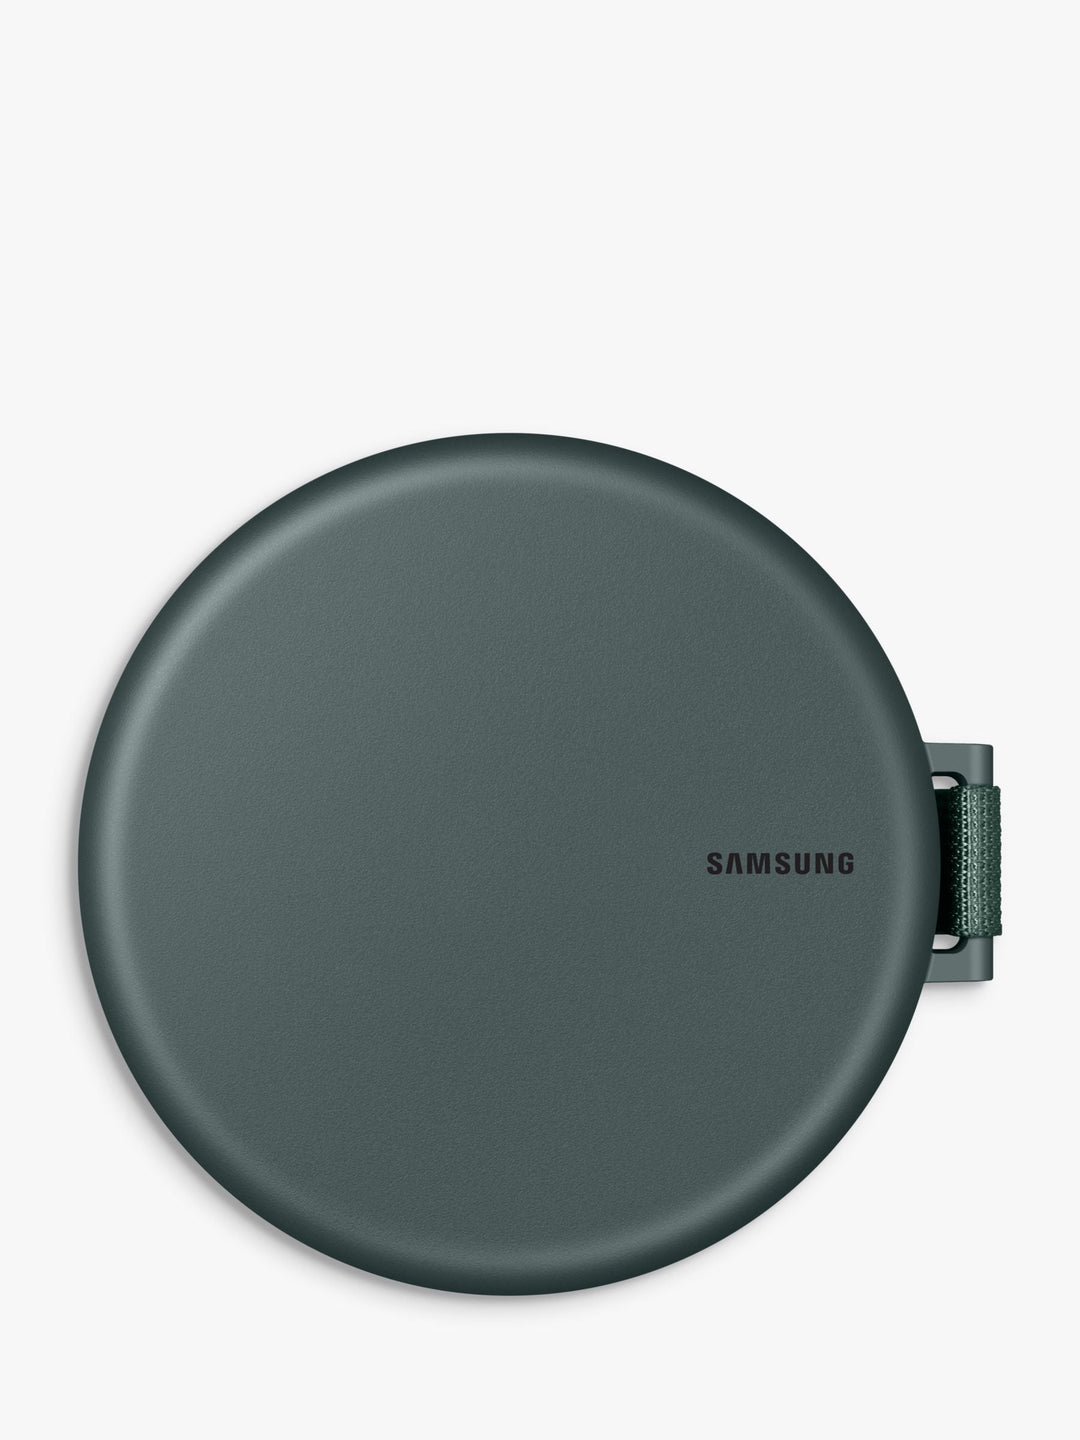 Samsung Freestyle Projector Case, Dark Green, Durable, Weather-Resistant, Compact, IP55 Water/Dust Protection